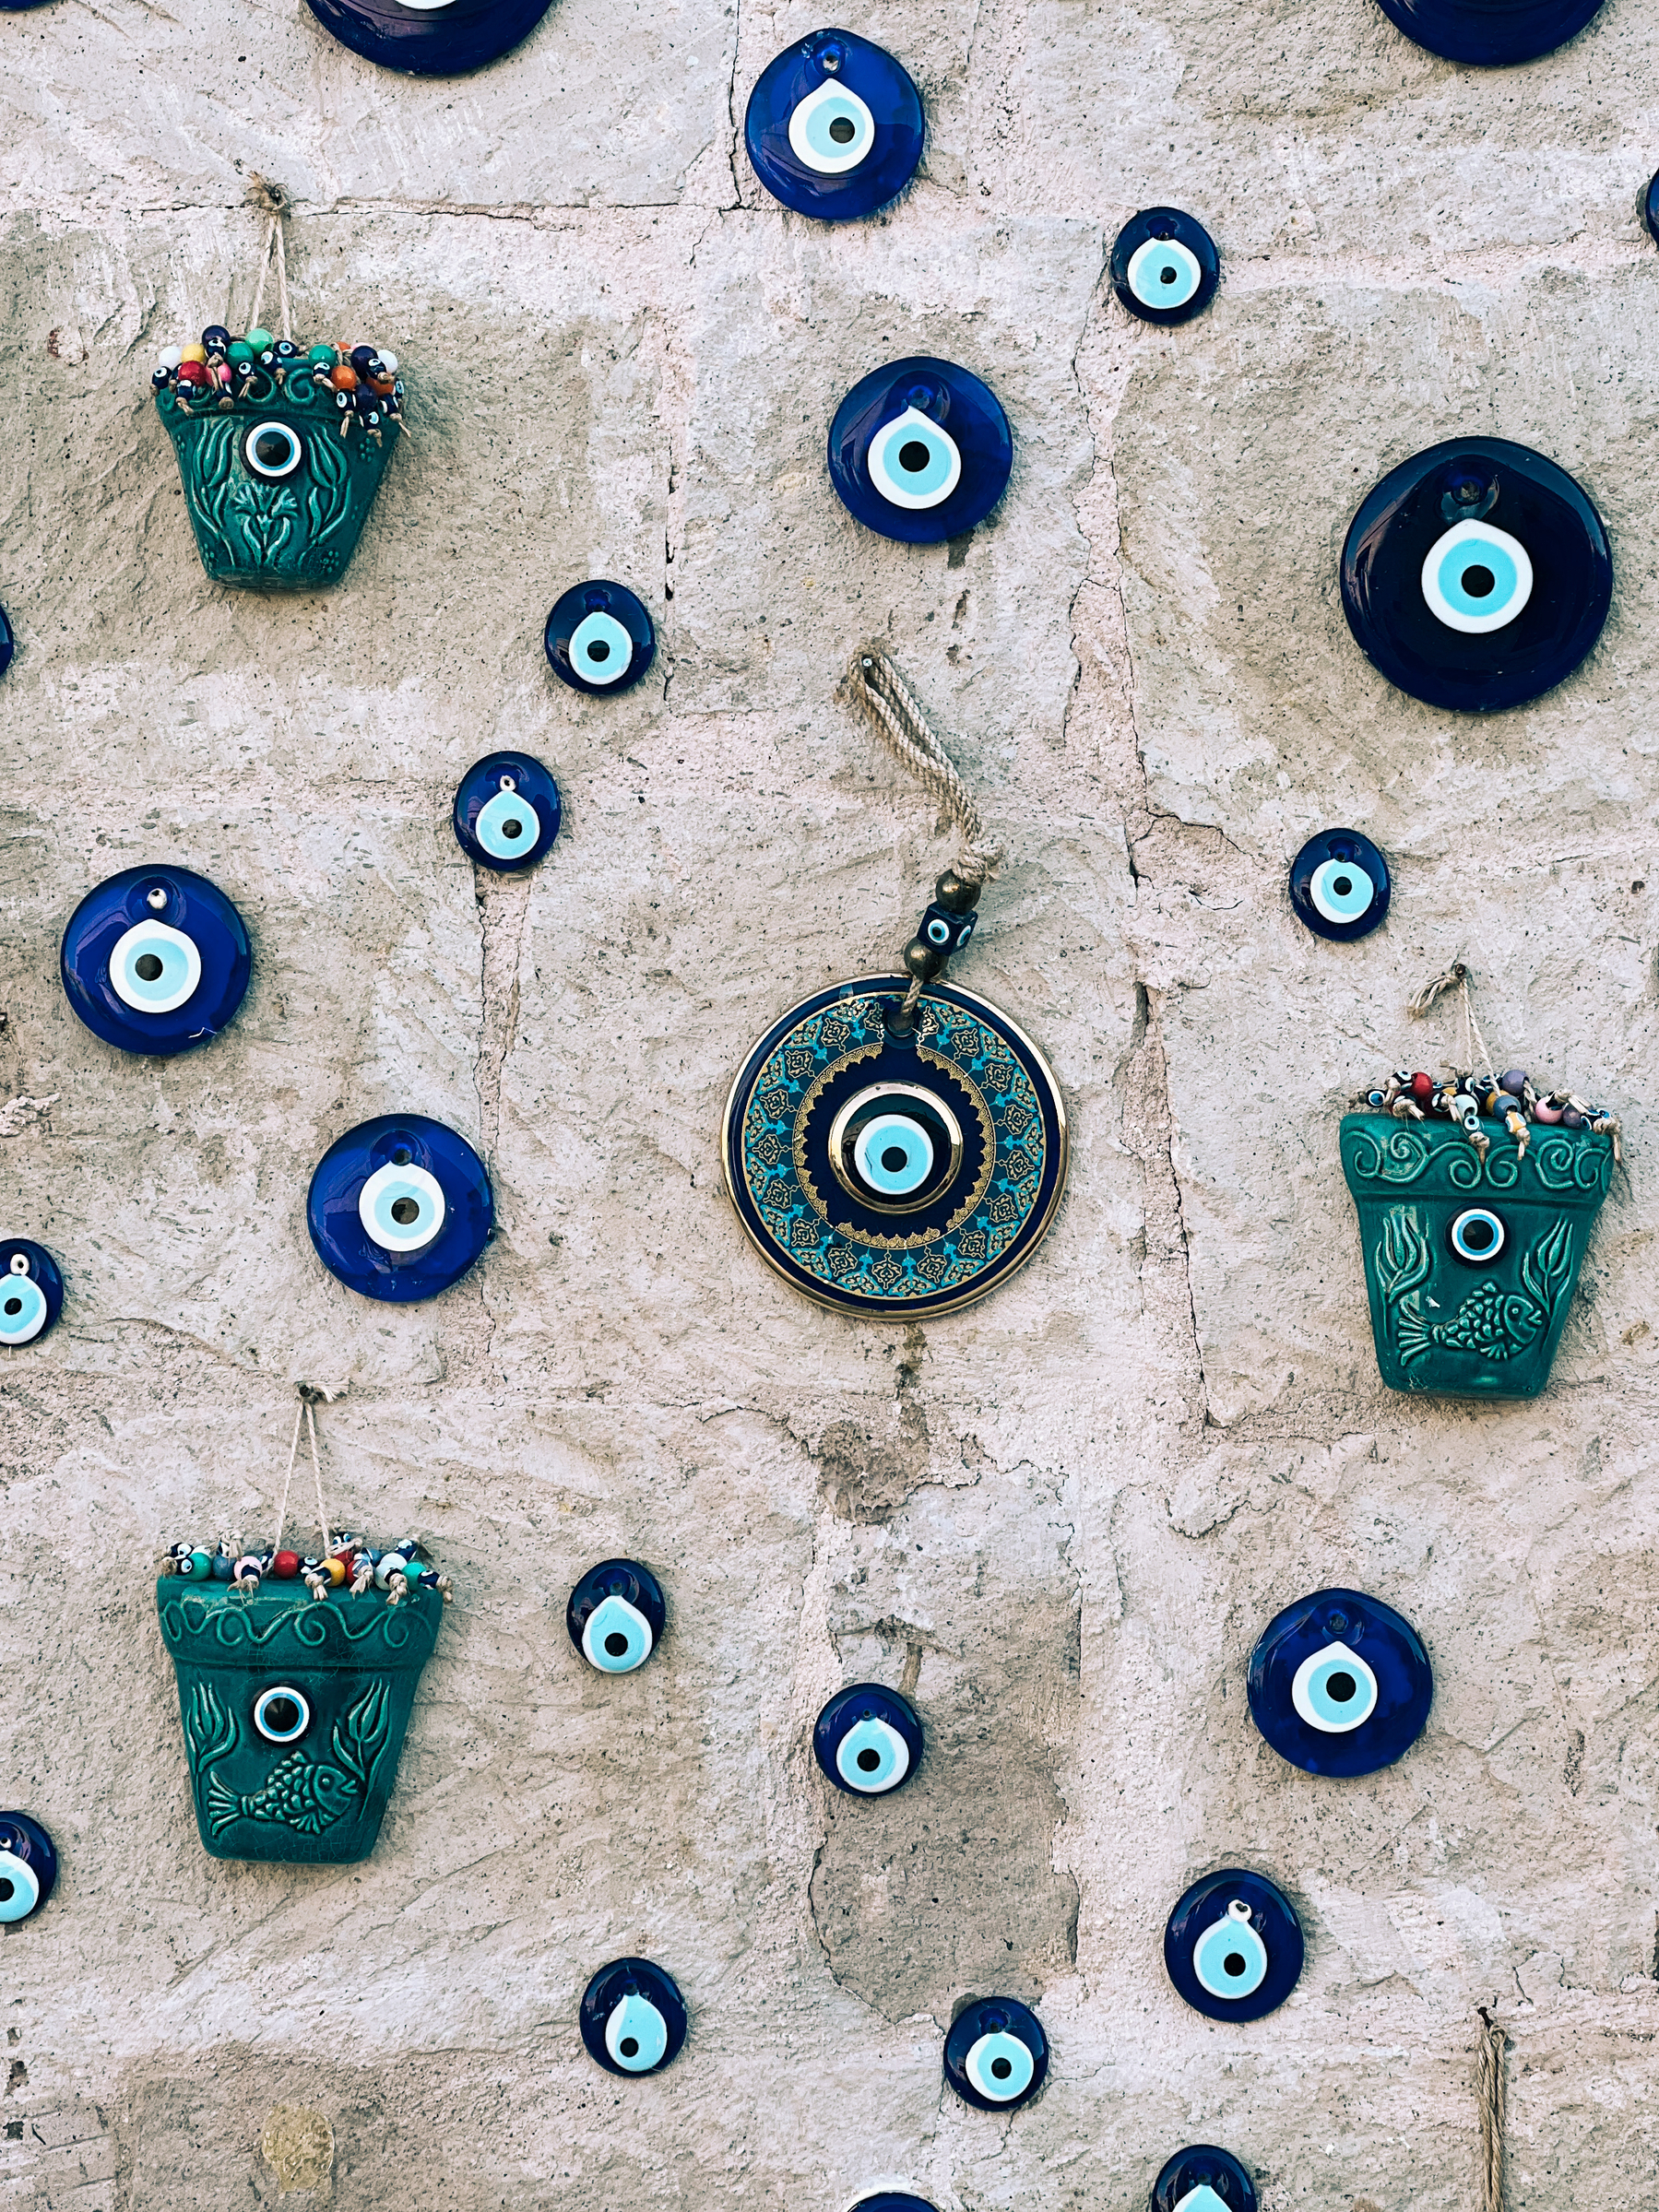 A wall with multiple ceramic “eye” pieces stuck to it. The eye thing is supposed to keep evil spirits away. 